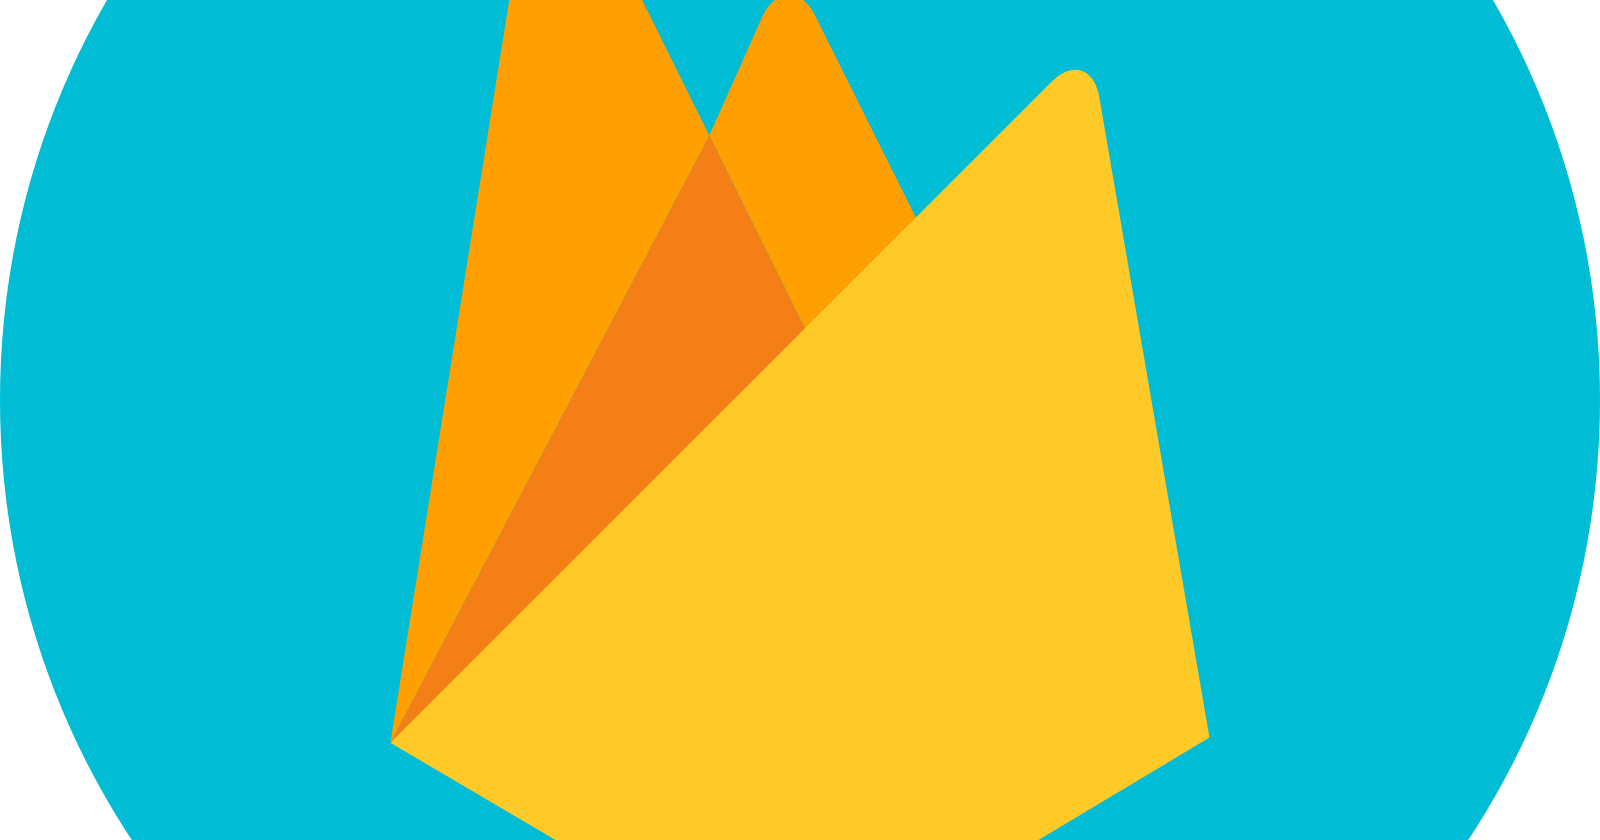 User Authentication With Firebase Auth and Realtime Database.